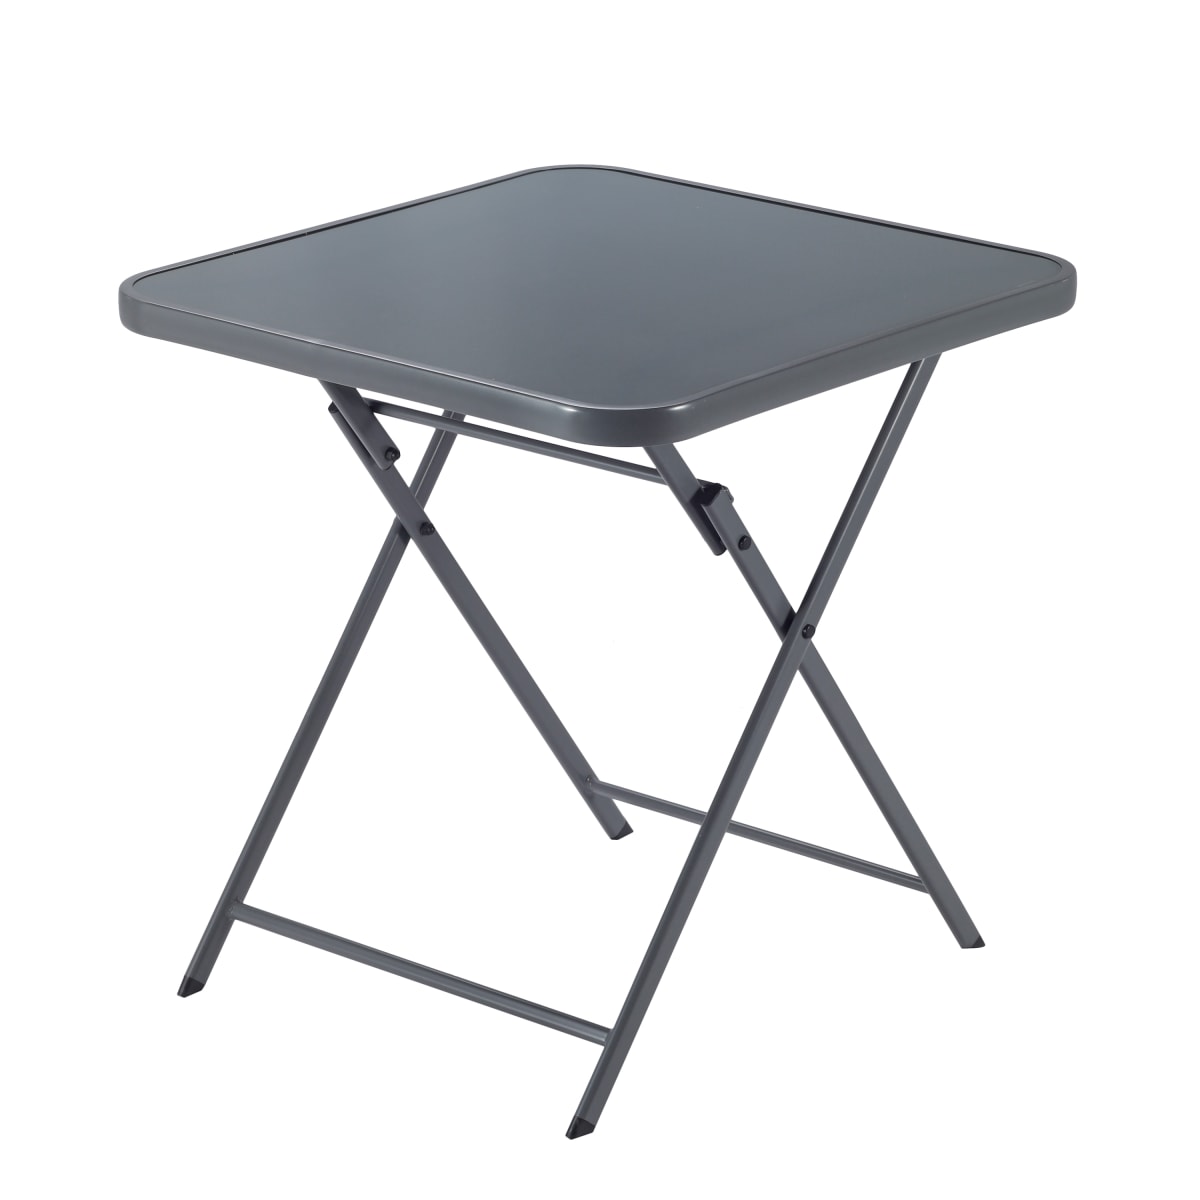 EMYS NATERAL TABLE Foldable 2 -seater square steel top glass 70x70xh70